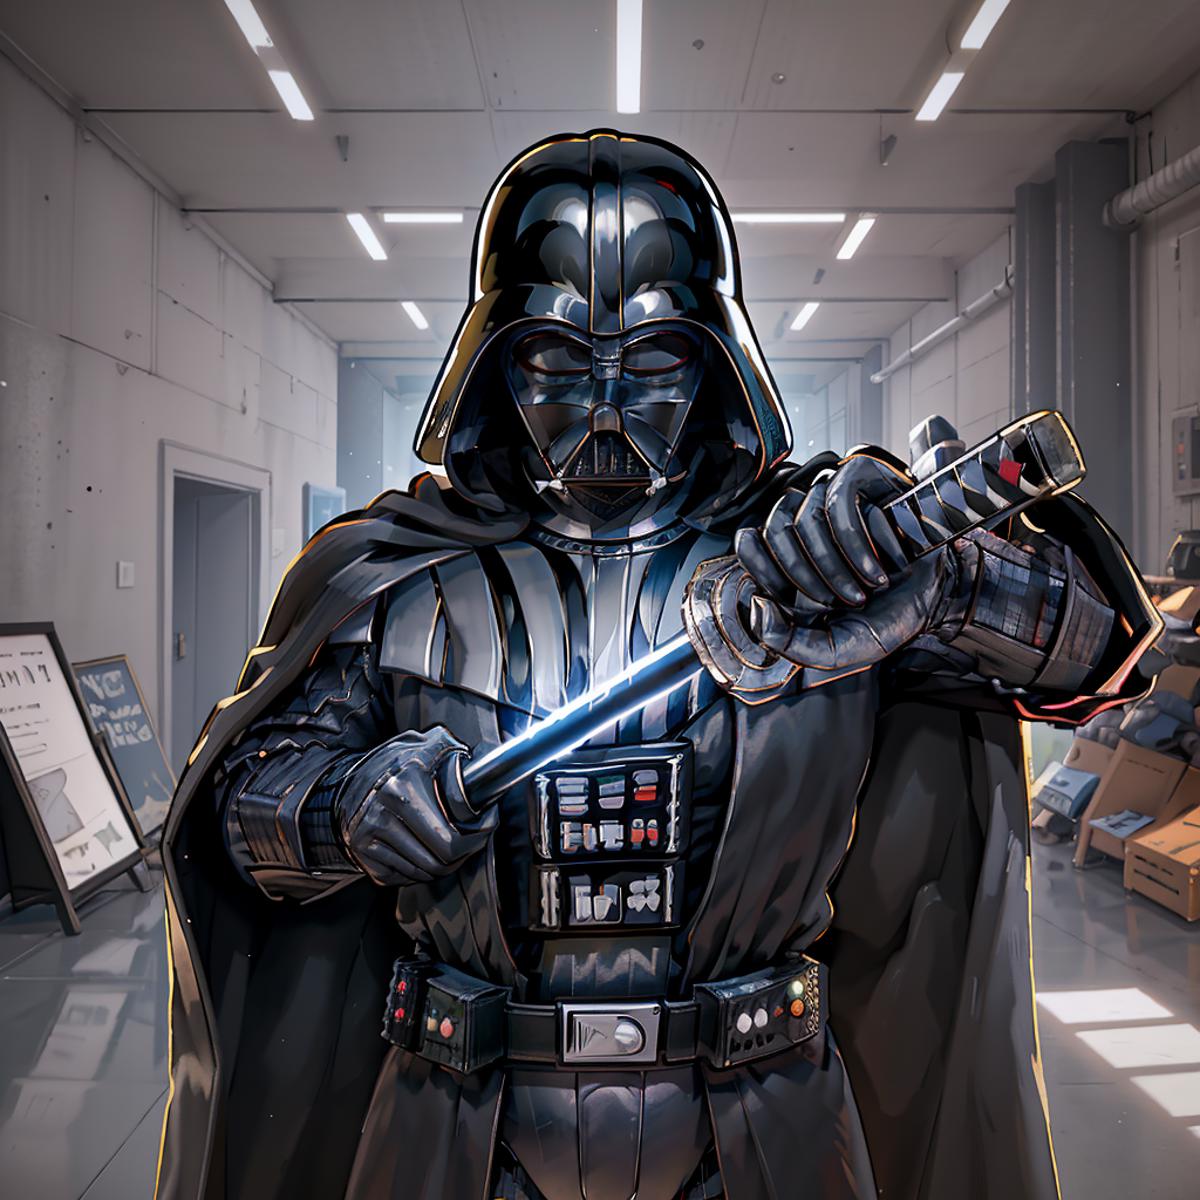 A cartoon image of a man in a Darth Vader costume holding a sword.